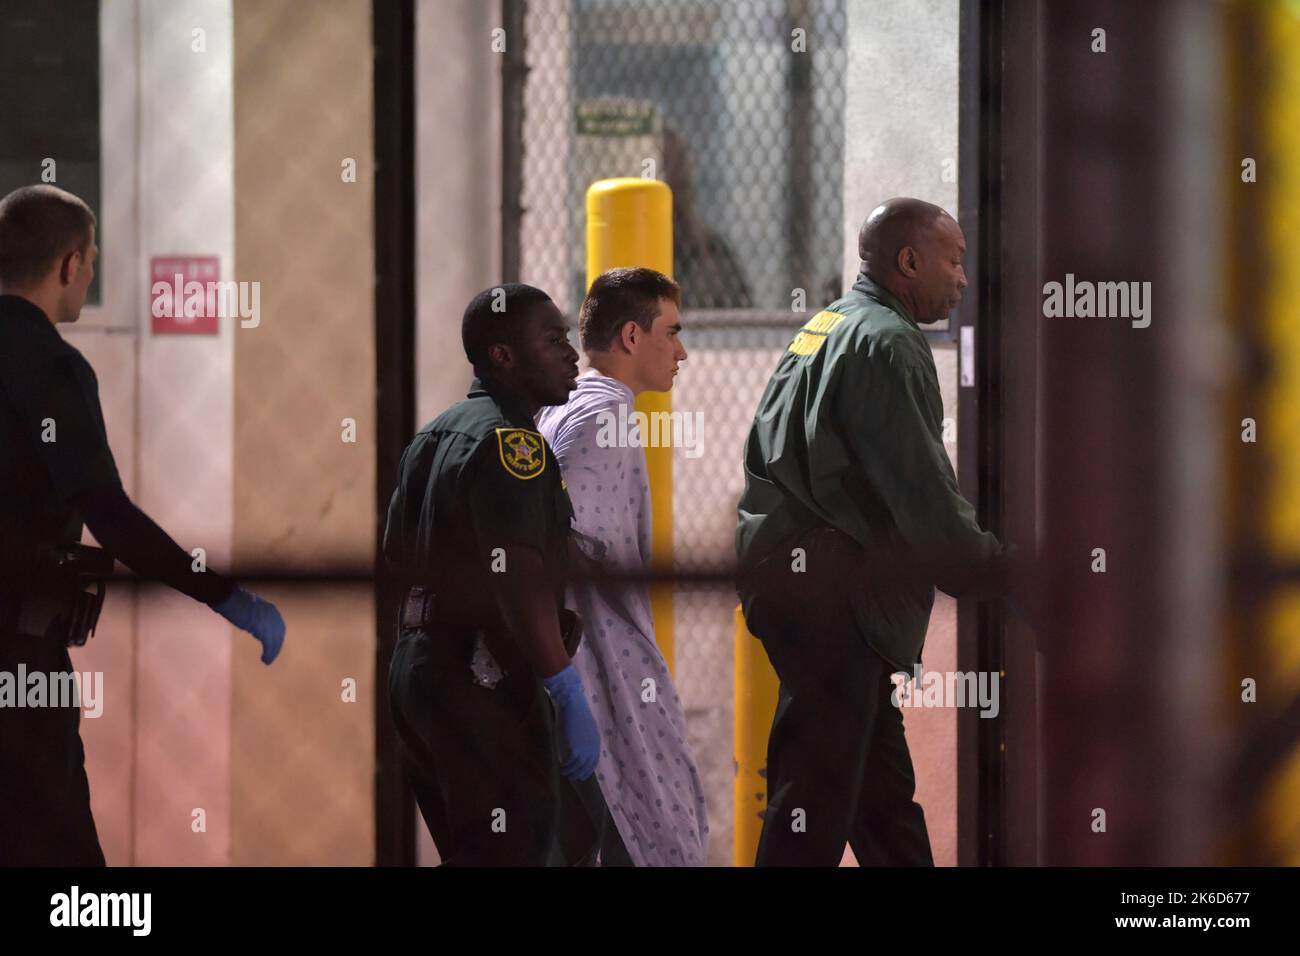 (EXCLUSIVE STILL PHOTOS) - NO SOCIAL MEDIA, INSTAGRAM, TWIITER OR FACEBOOK FORT LAUDERDALE, FL - FEBRUARY 14: Murder Suspect Nikolas Cruz, 19, Books Into Jail after School shooting at Marjory Stoneman Douglas High Which Killed 17 People on February 14, 2018 in Fort Lauderdale, People: Nikolas Cruz Credit: Storms Media Group/Alamy Live News Stock Photo